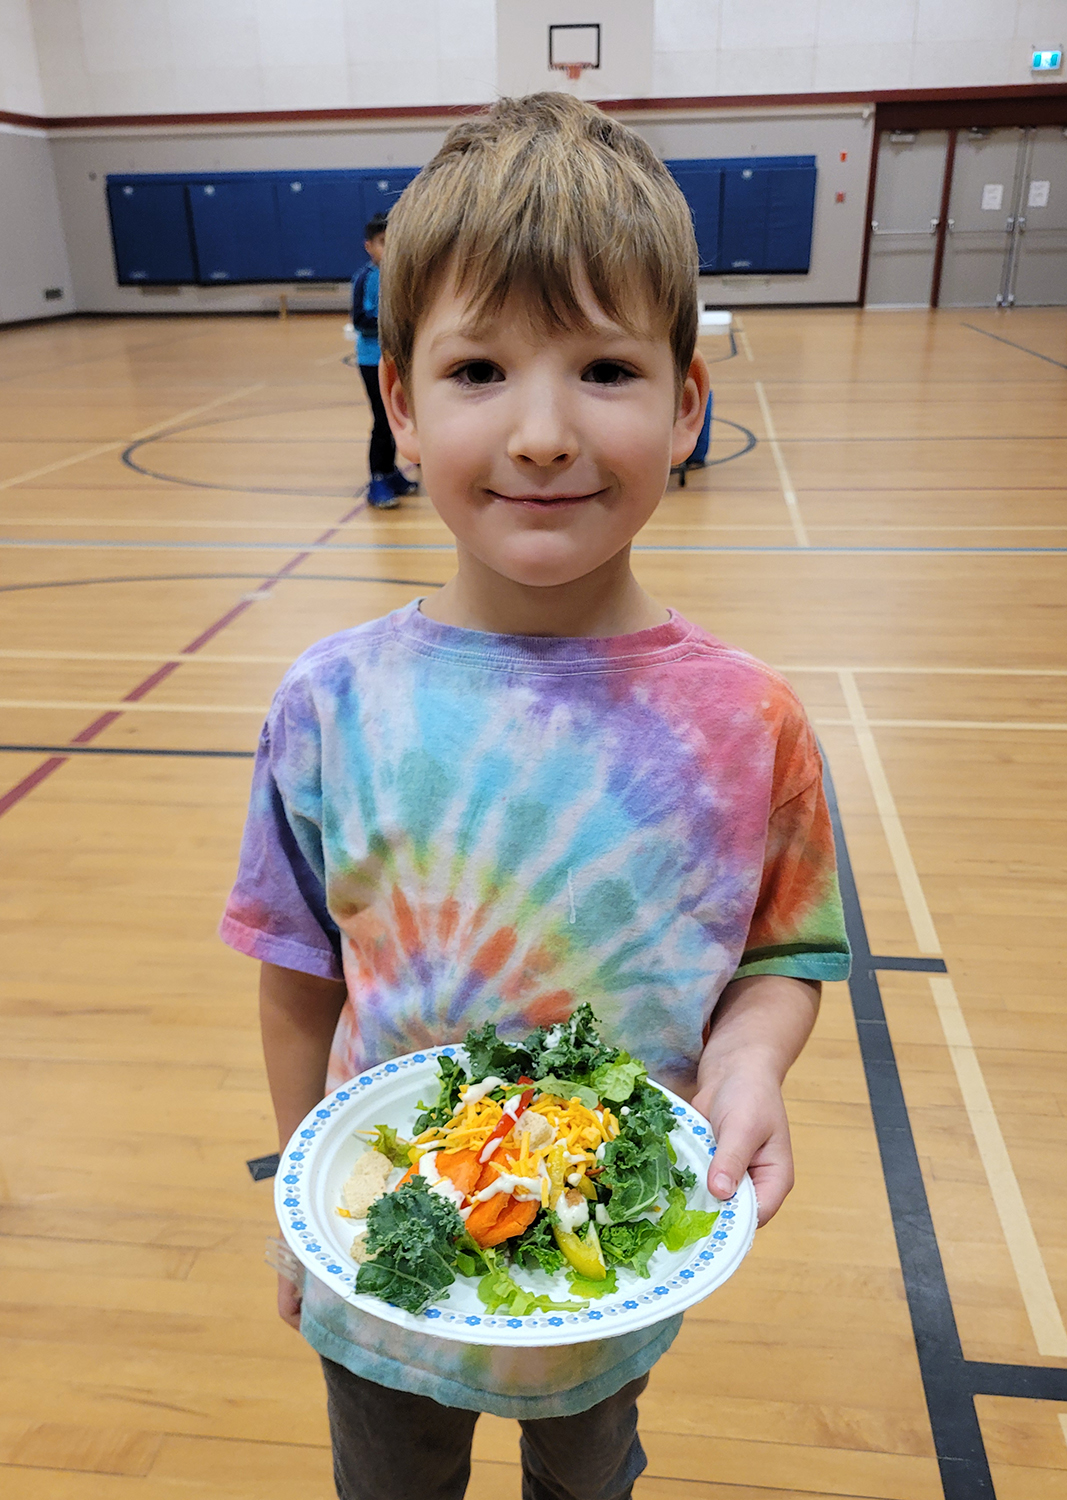 Young boy holding plate of salad